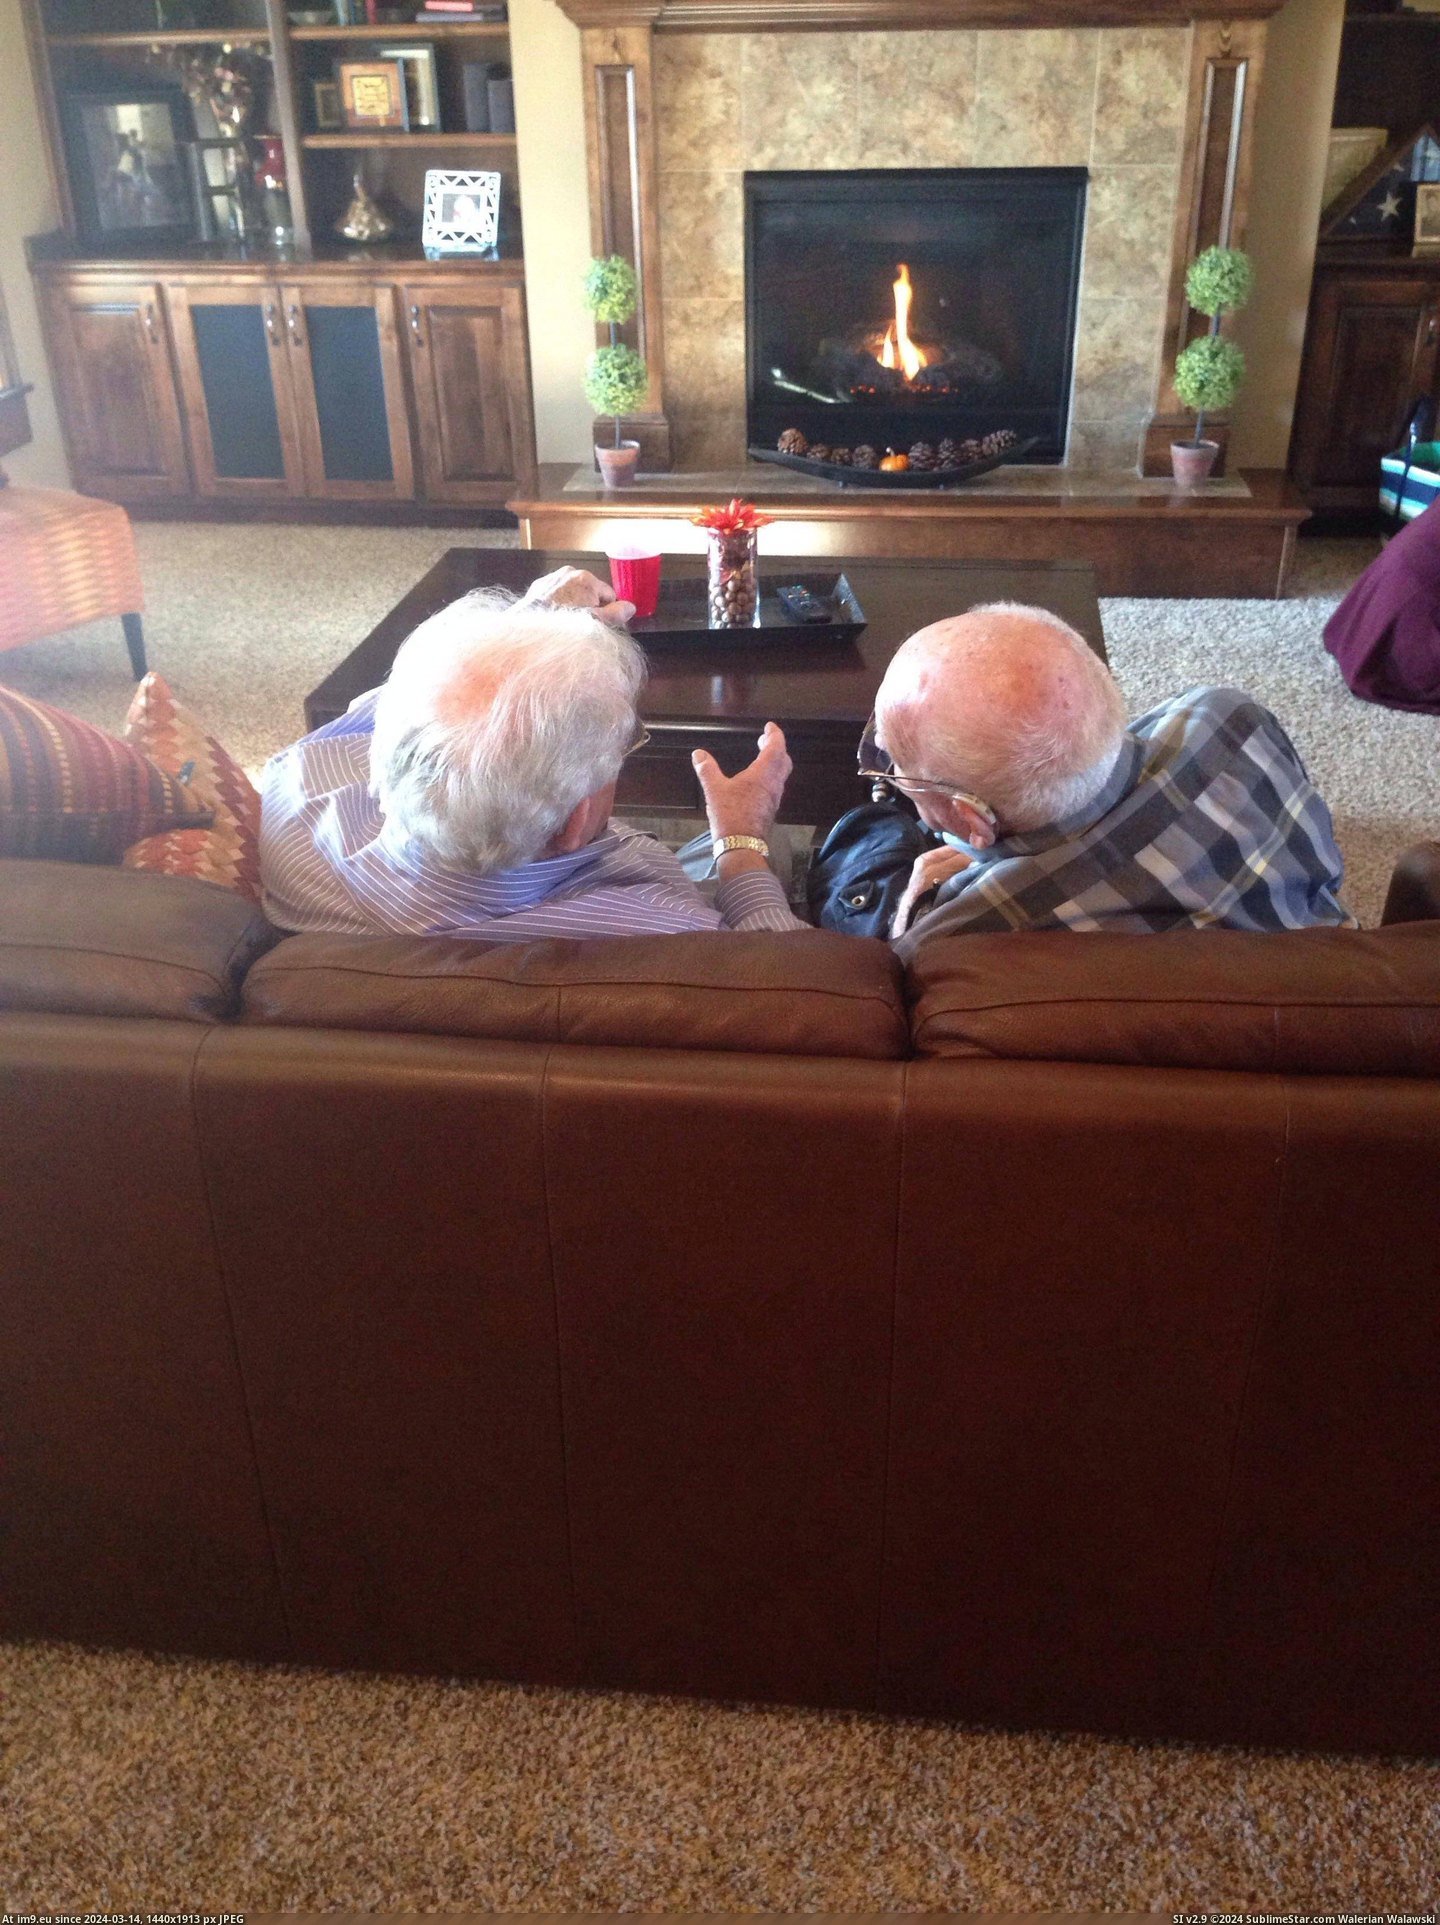 #Year #Old #Thanksgiving #Reminiscing #Brother #Grandpa [Aww] My 87 year old Grandpa and his 92 year old brother reminiscing on Thanksgiving. Pic. (Obraz z album My r/AWW favs))